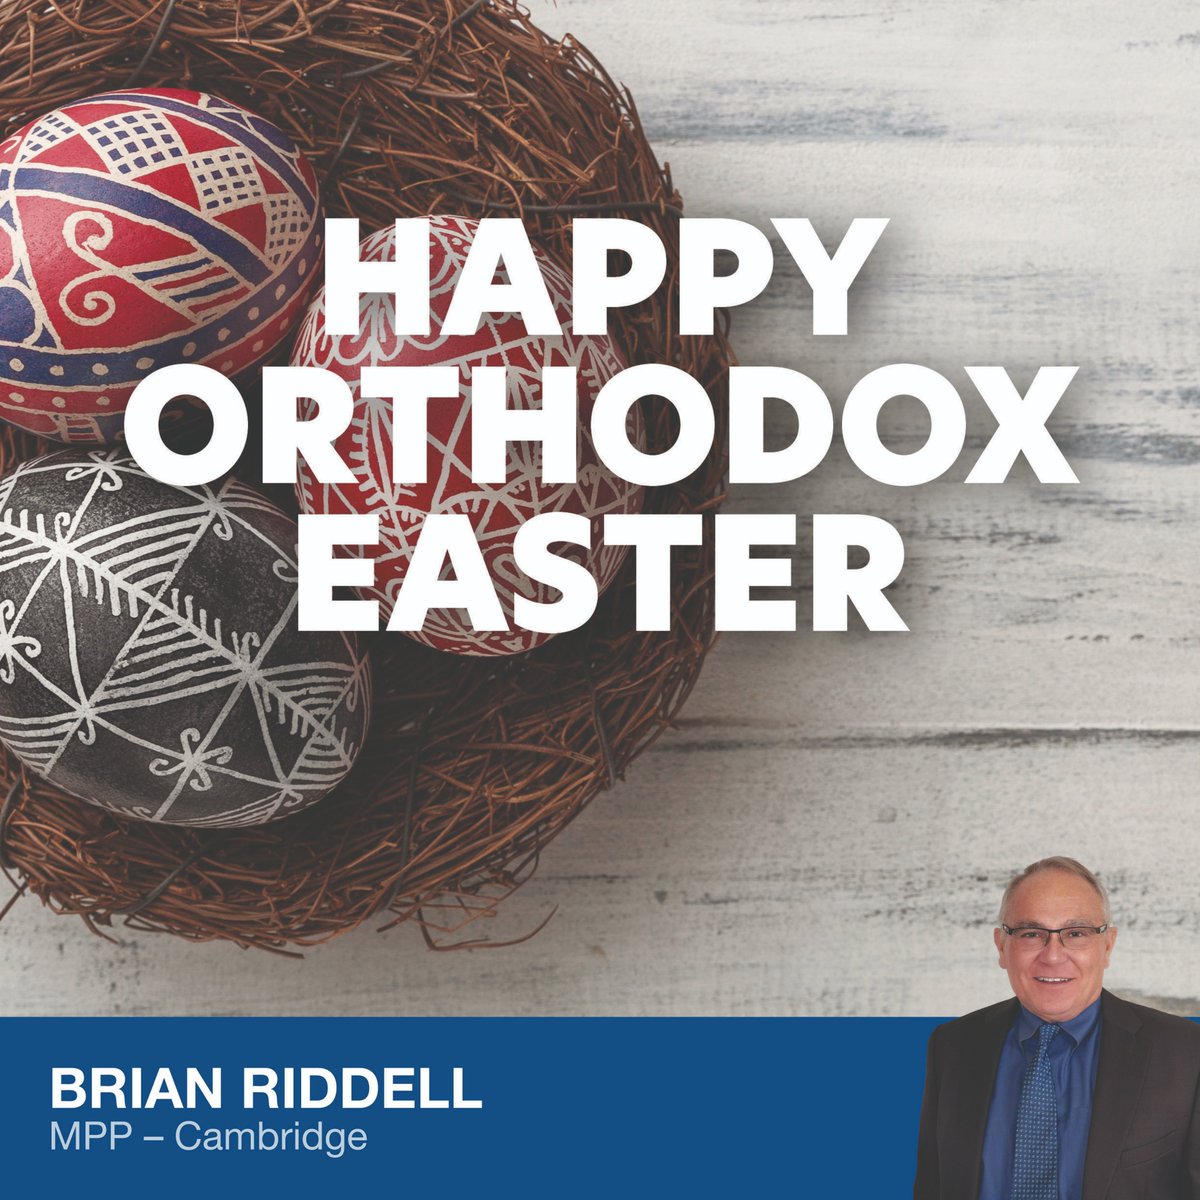 Wishing Ontario’s Orthodox communities happy #OrthodoxEaster! Orthodox Easter is the most significant and sacred season of the Eastern Christian church's calendar. May you have a joyous day filled with many blessings.